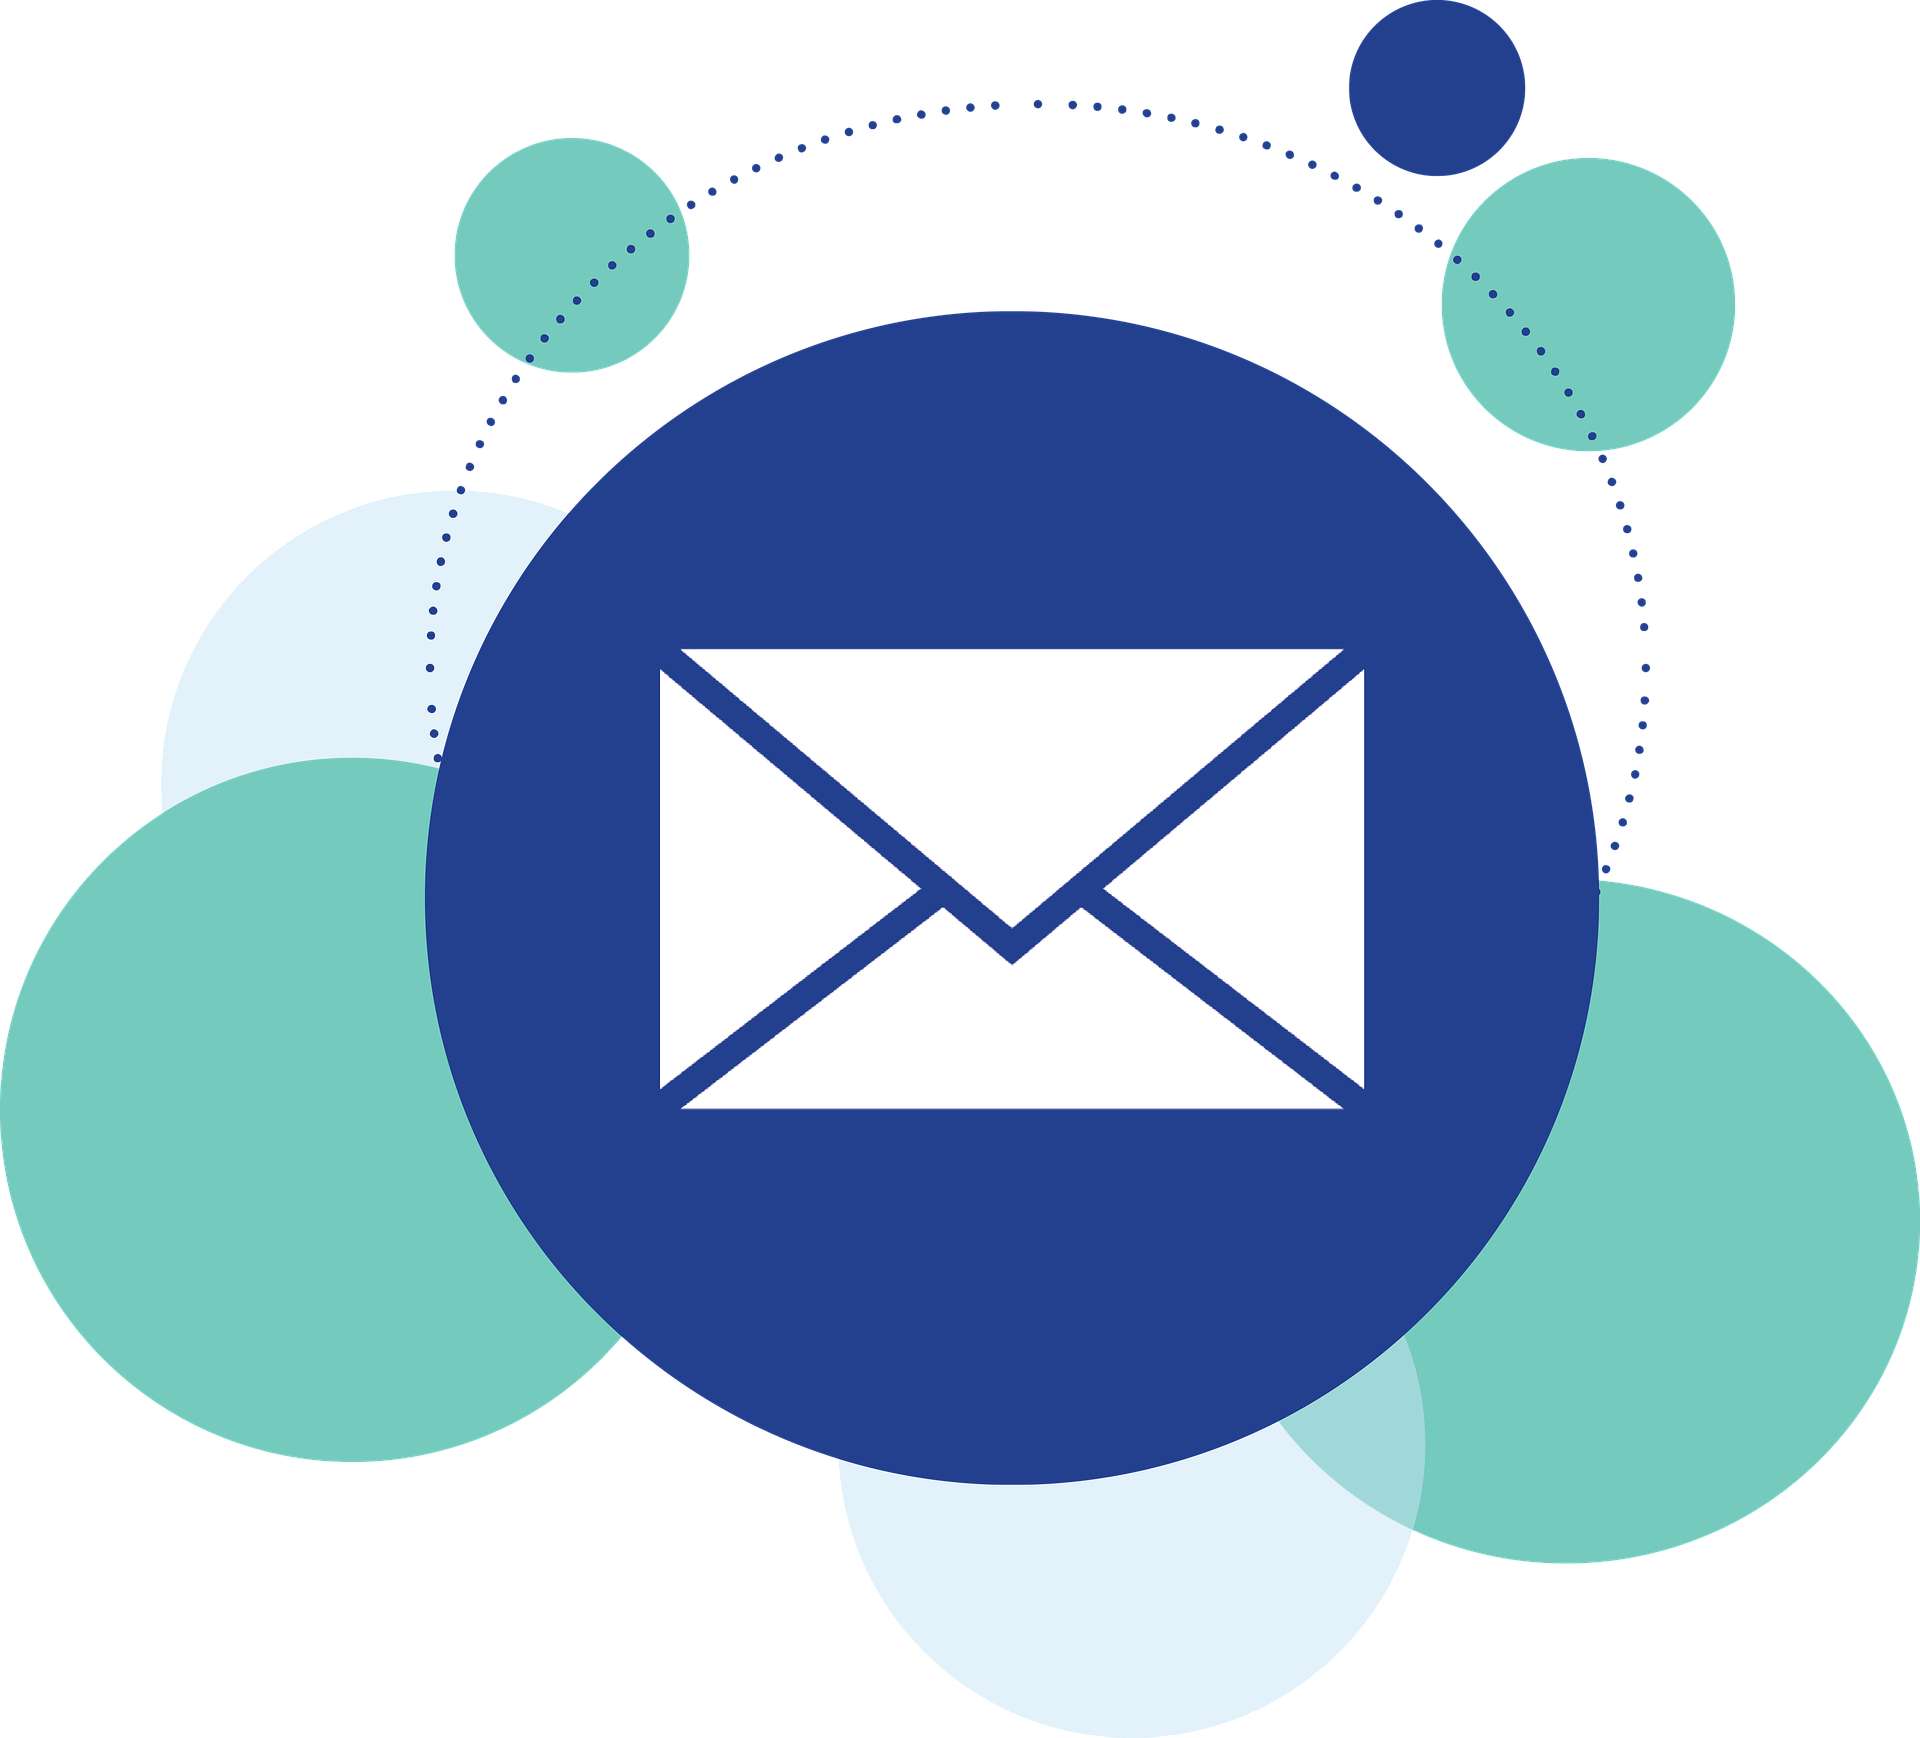 Be a Better Sender: Email Resolutions for 2018